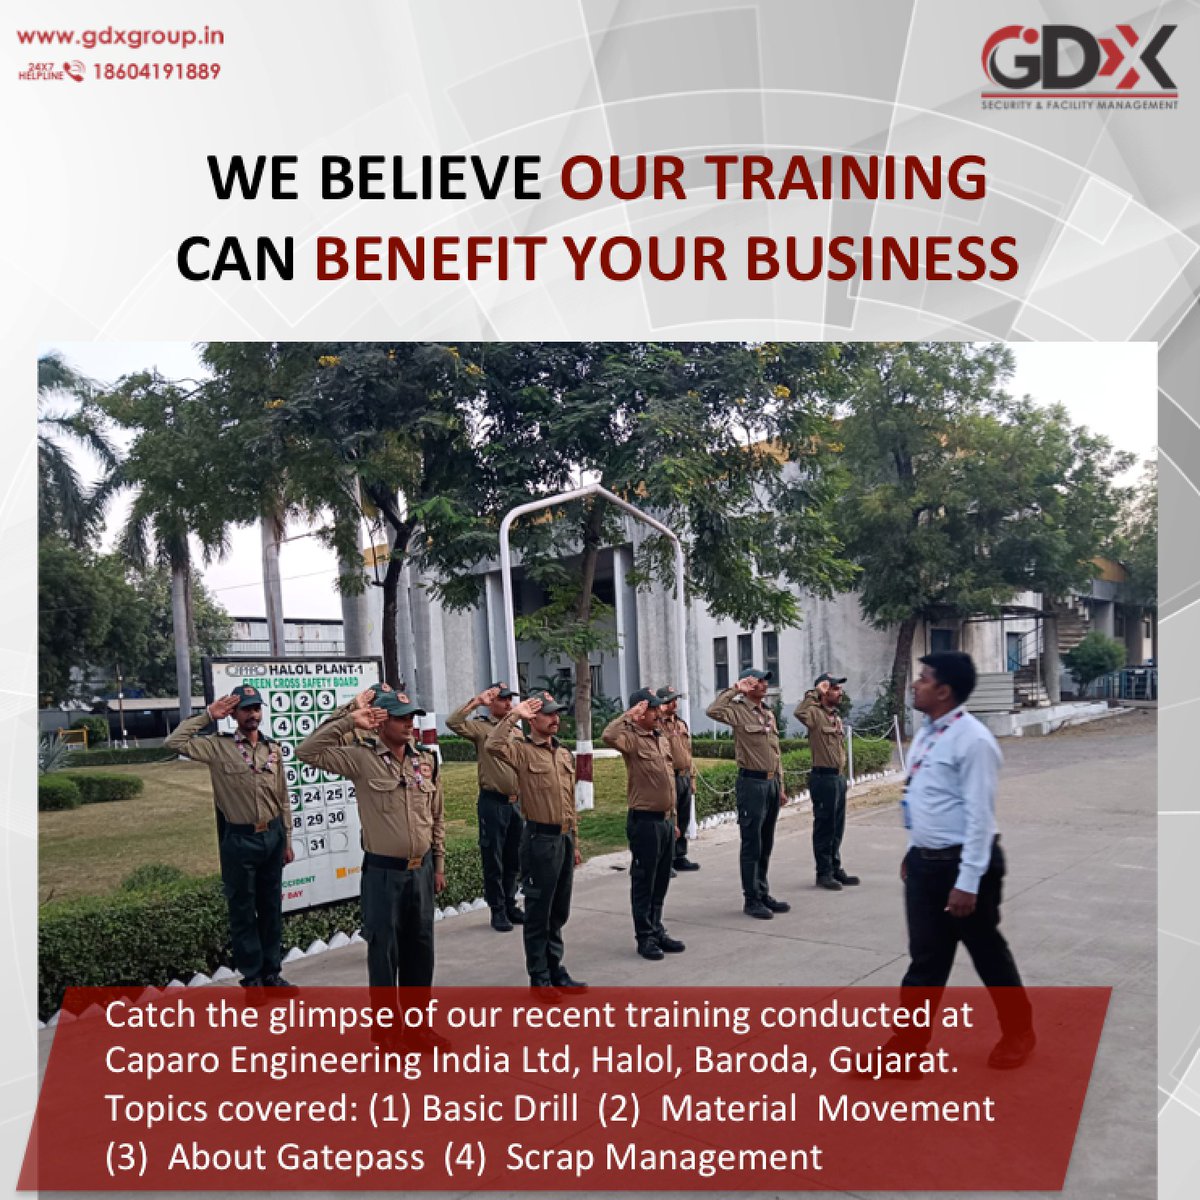 Our Training allows our employees to acquire new skills, sharpen existing ones, perform better, increase productivity. 
#GDXGroup #GDXtech #GDXuniqueservices #GDX37YearsofServiceExcellence #SecurityServices #GDXtraining